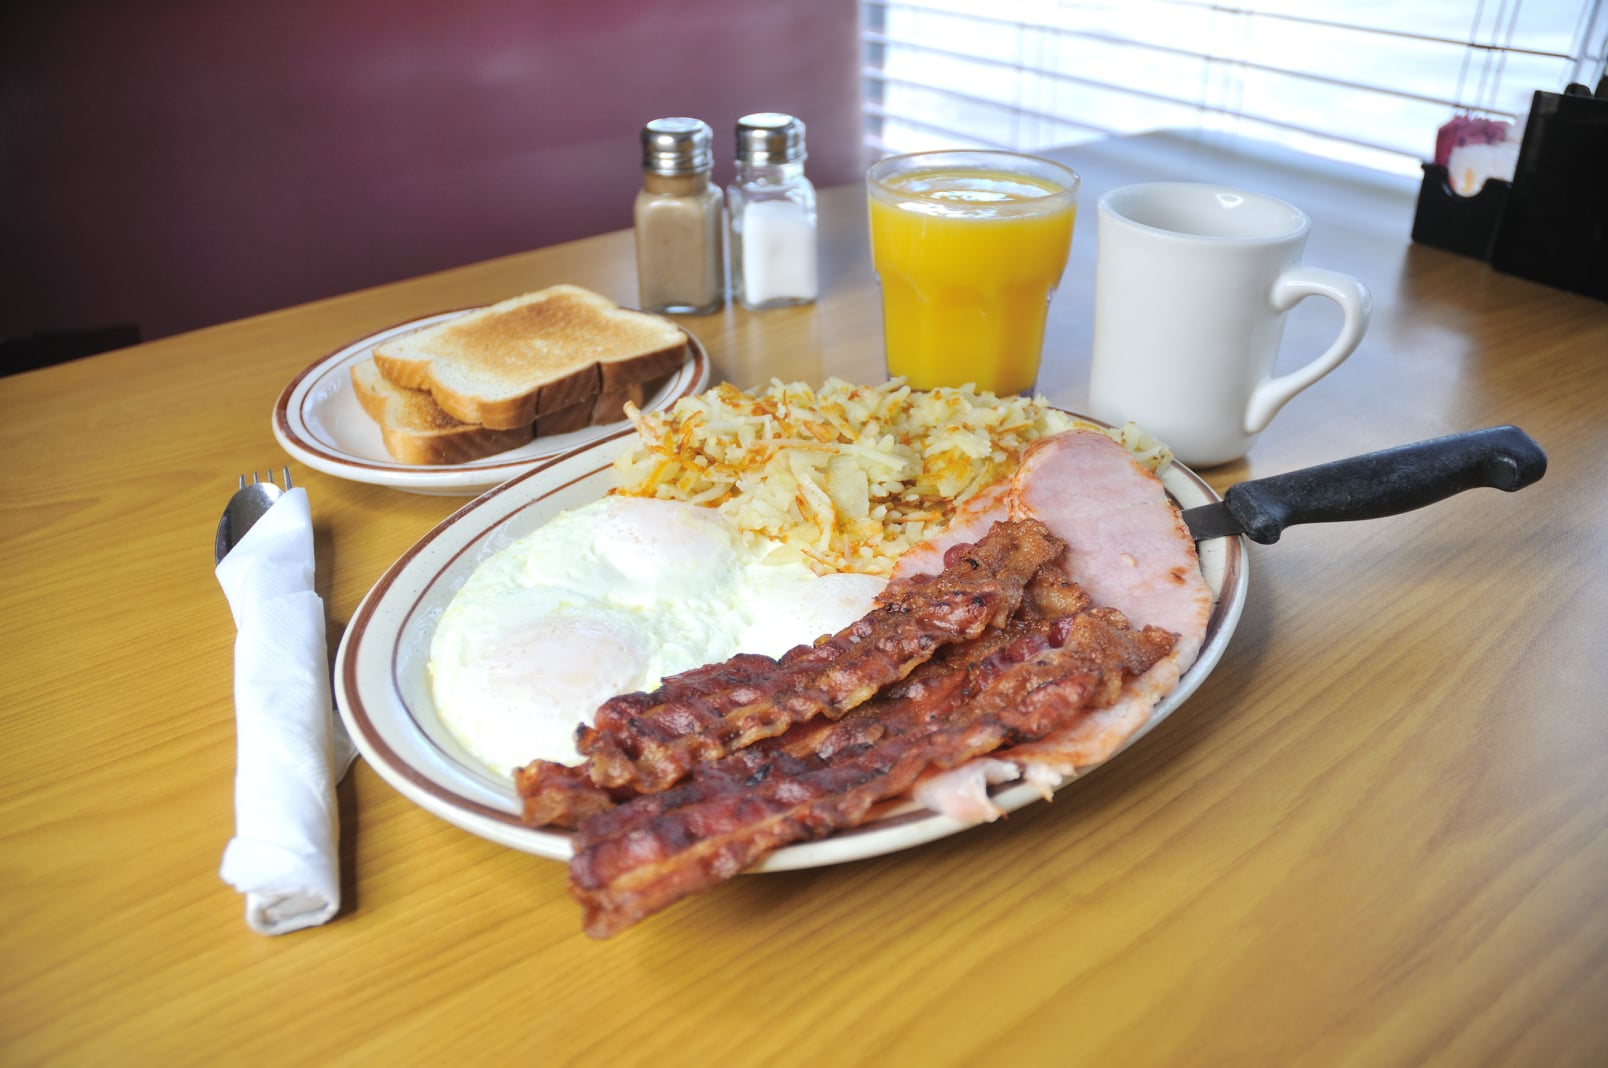 fried eggs, bacon, hame, hash browns, and toast with a cup of coffee and orange juice